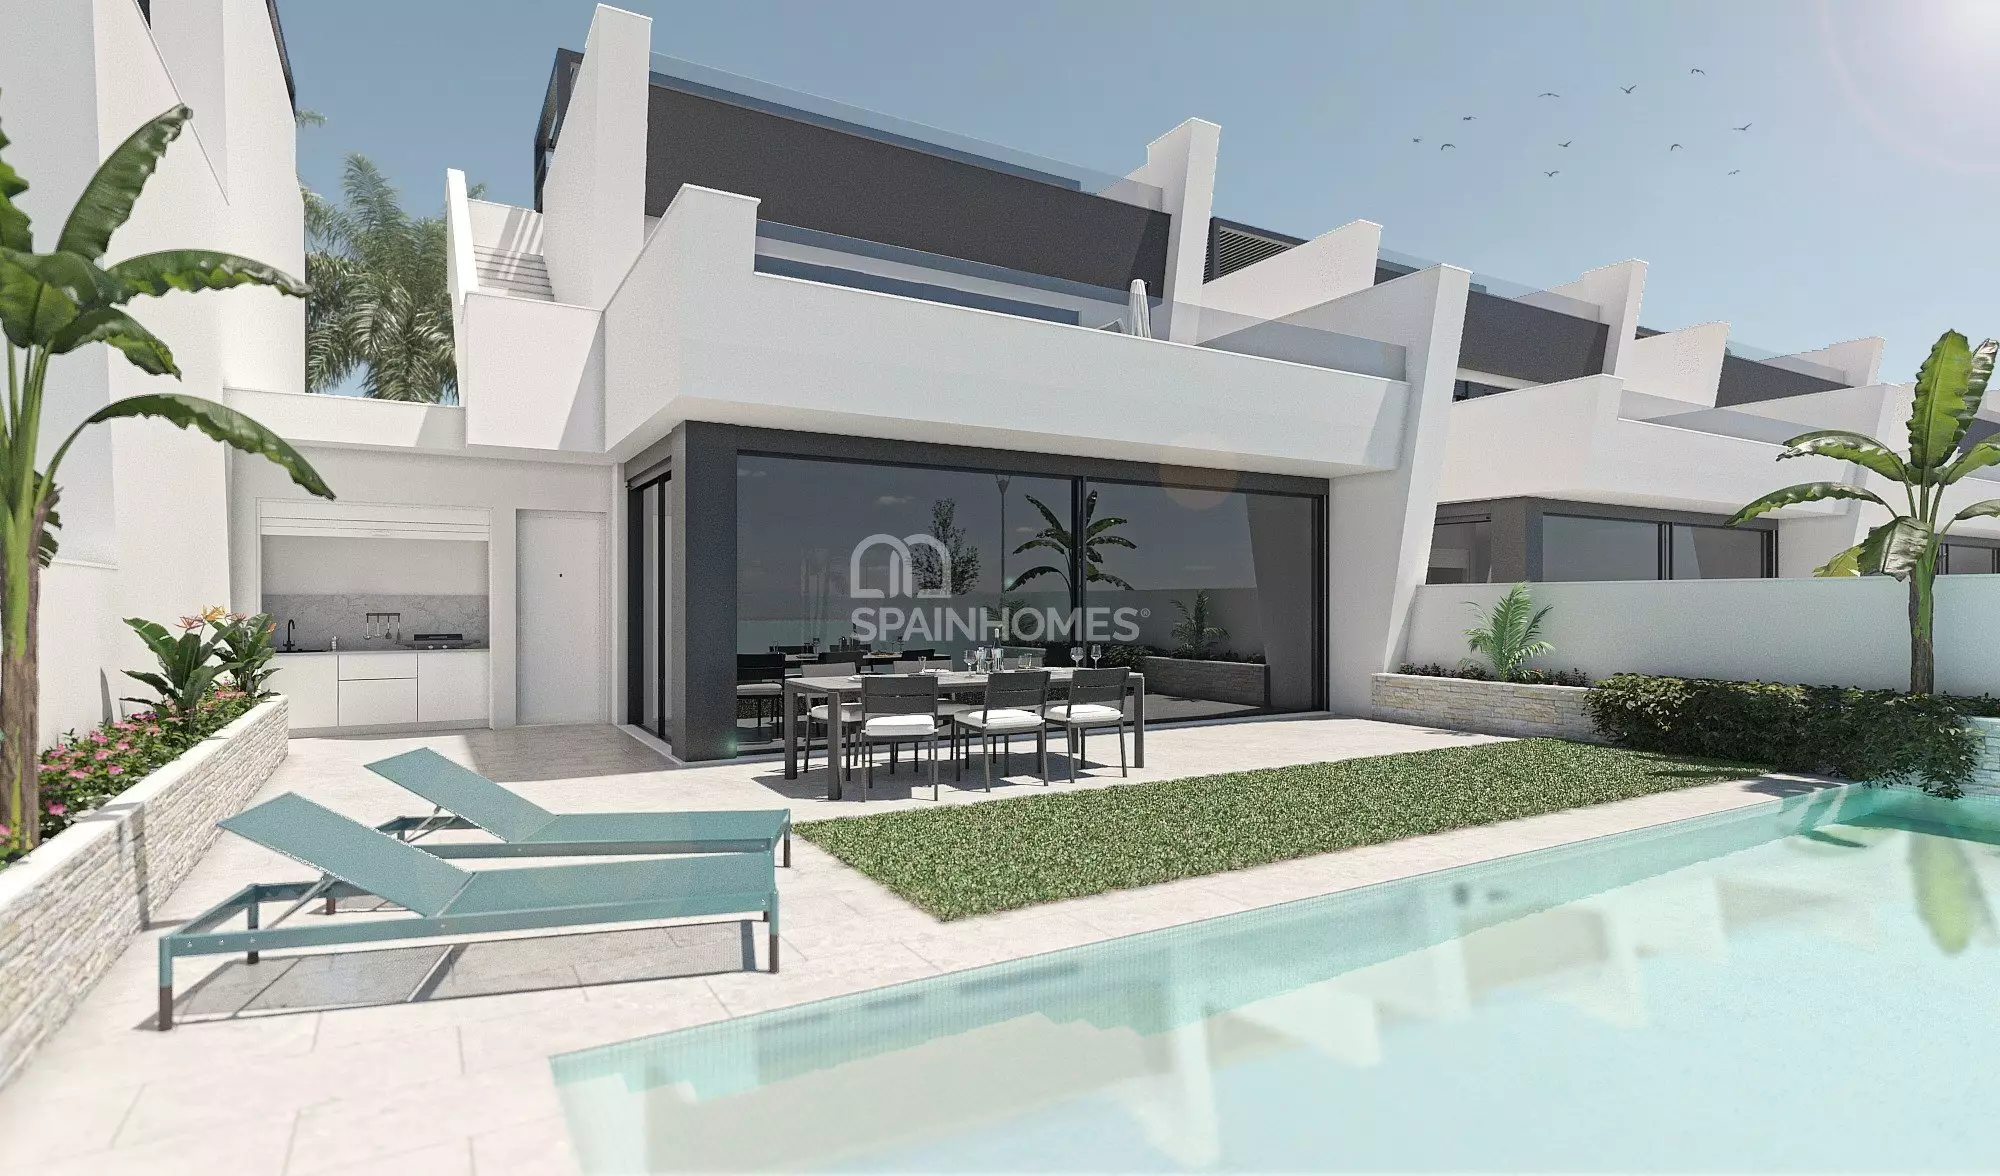 Detached Villas with Private Pools and Solariums in San Javier